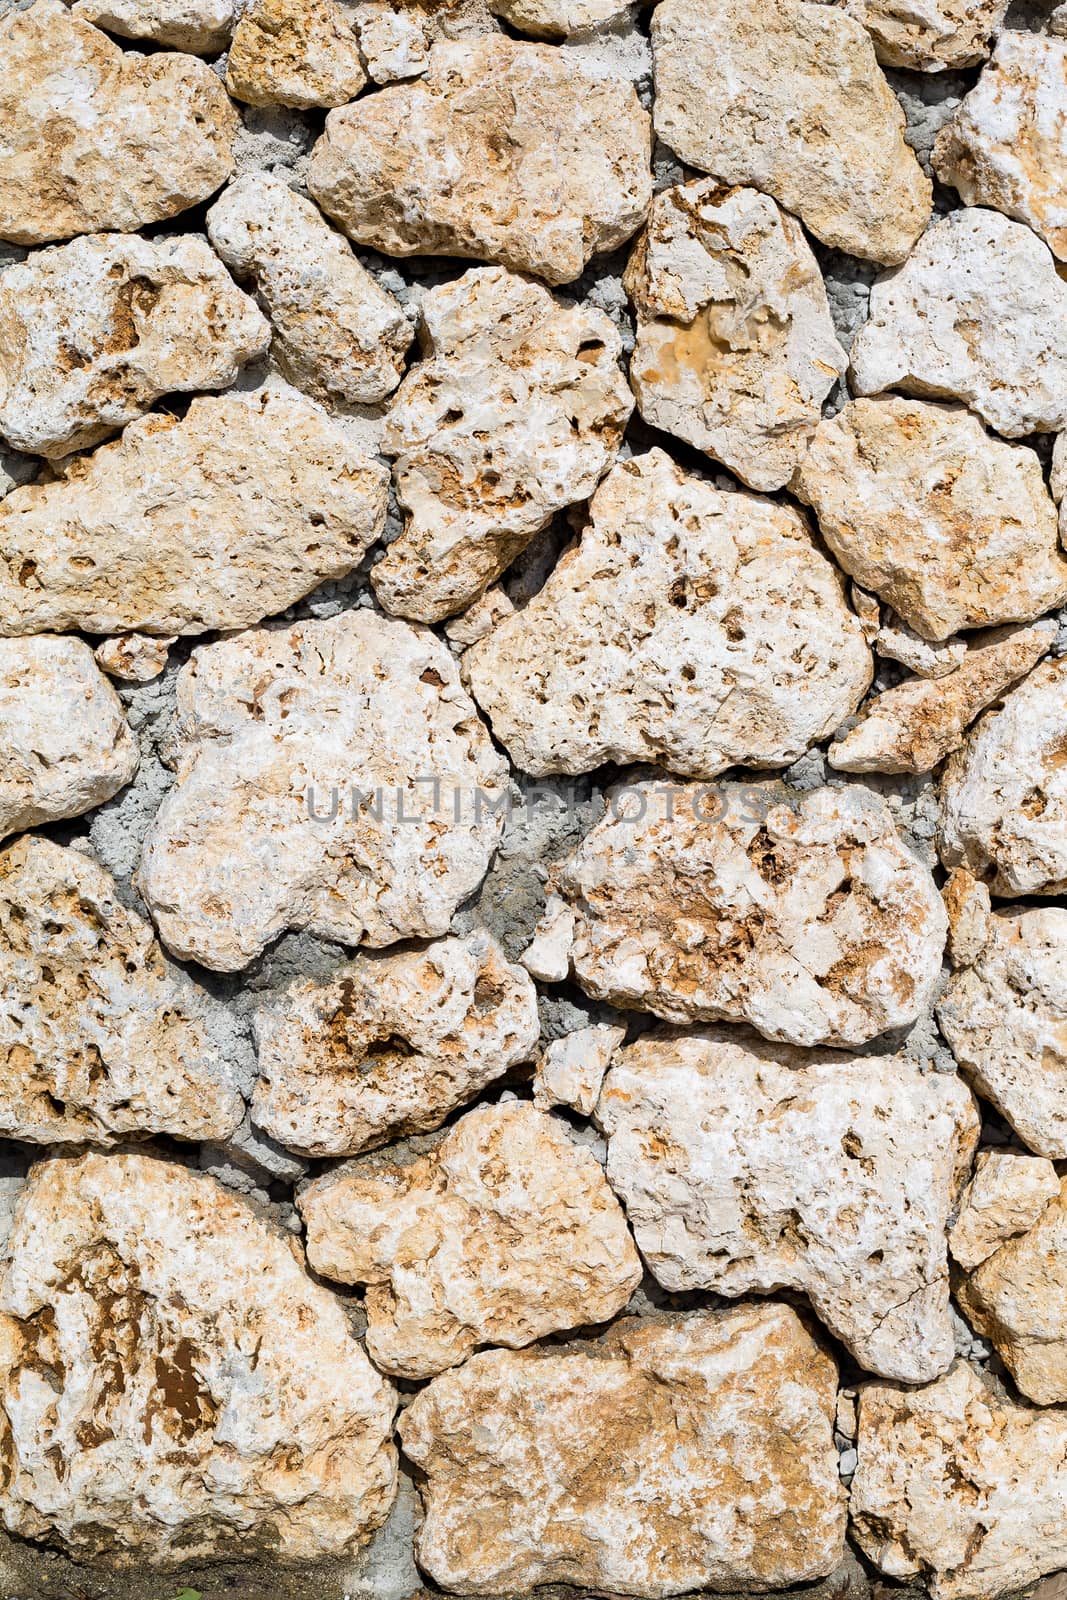 Background texture of stone wall